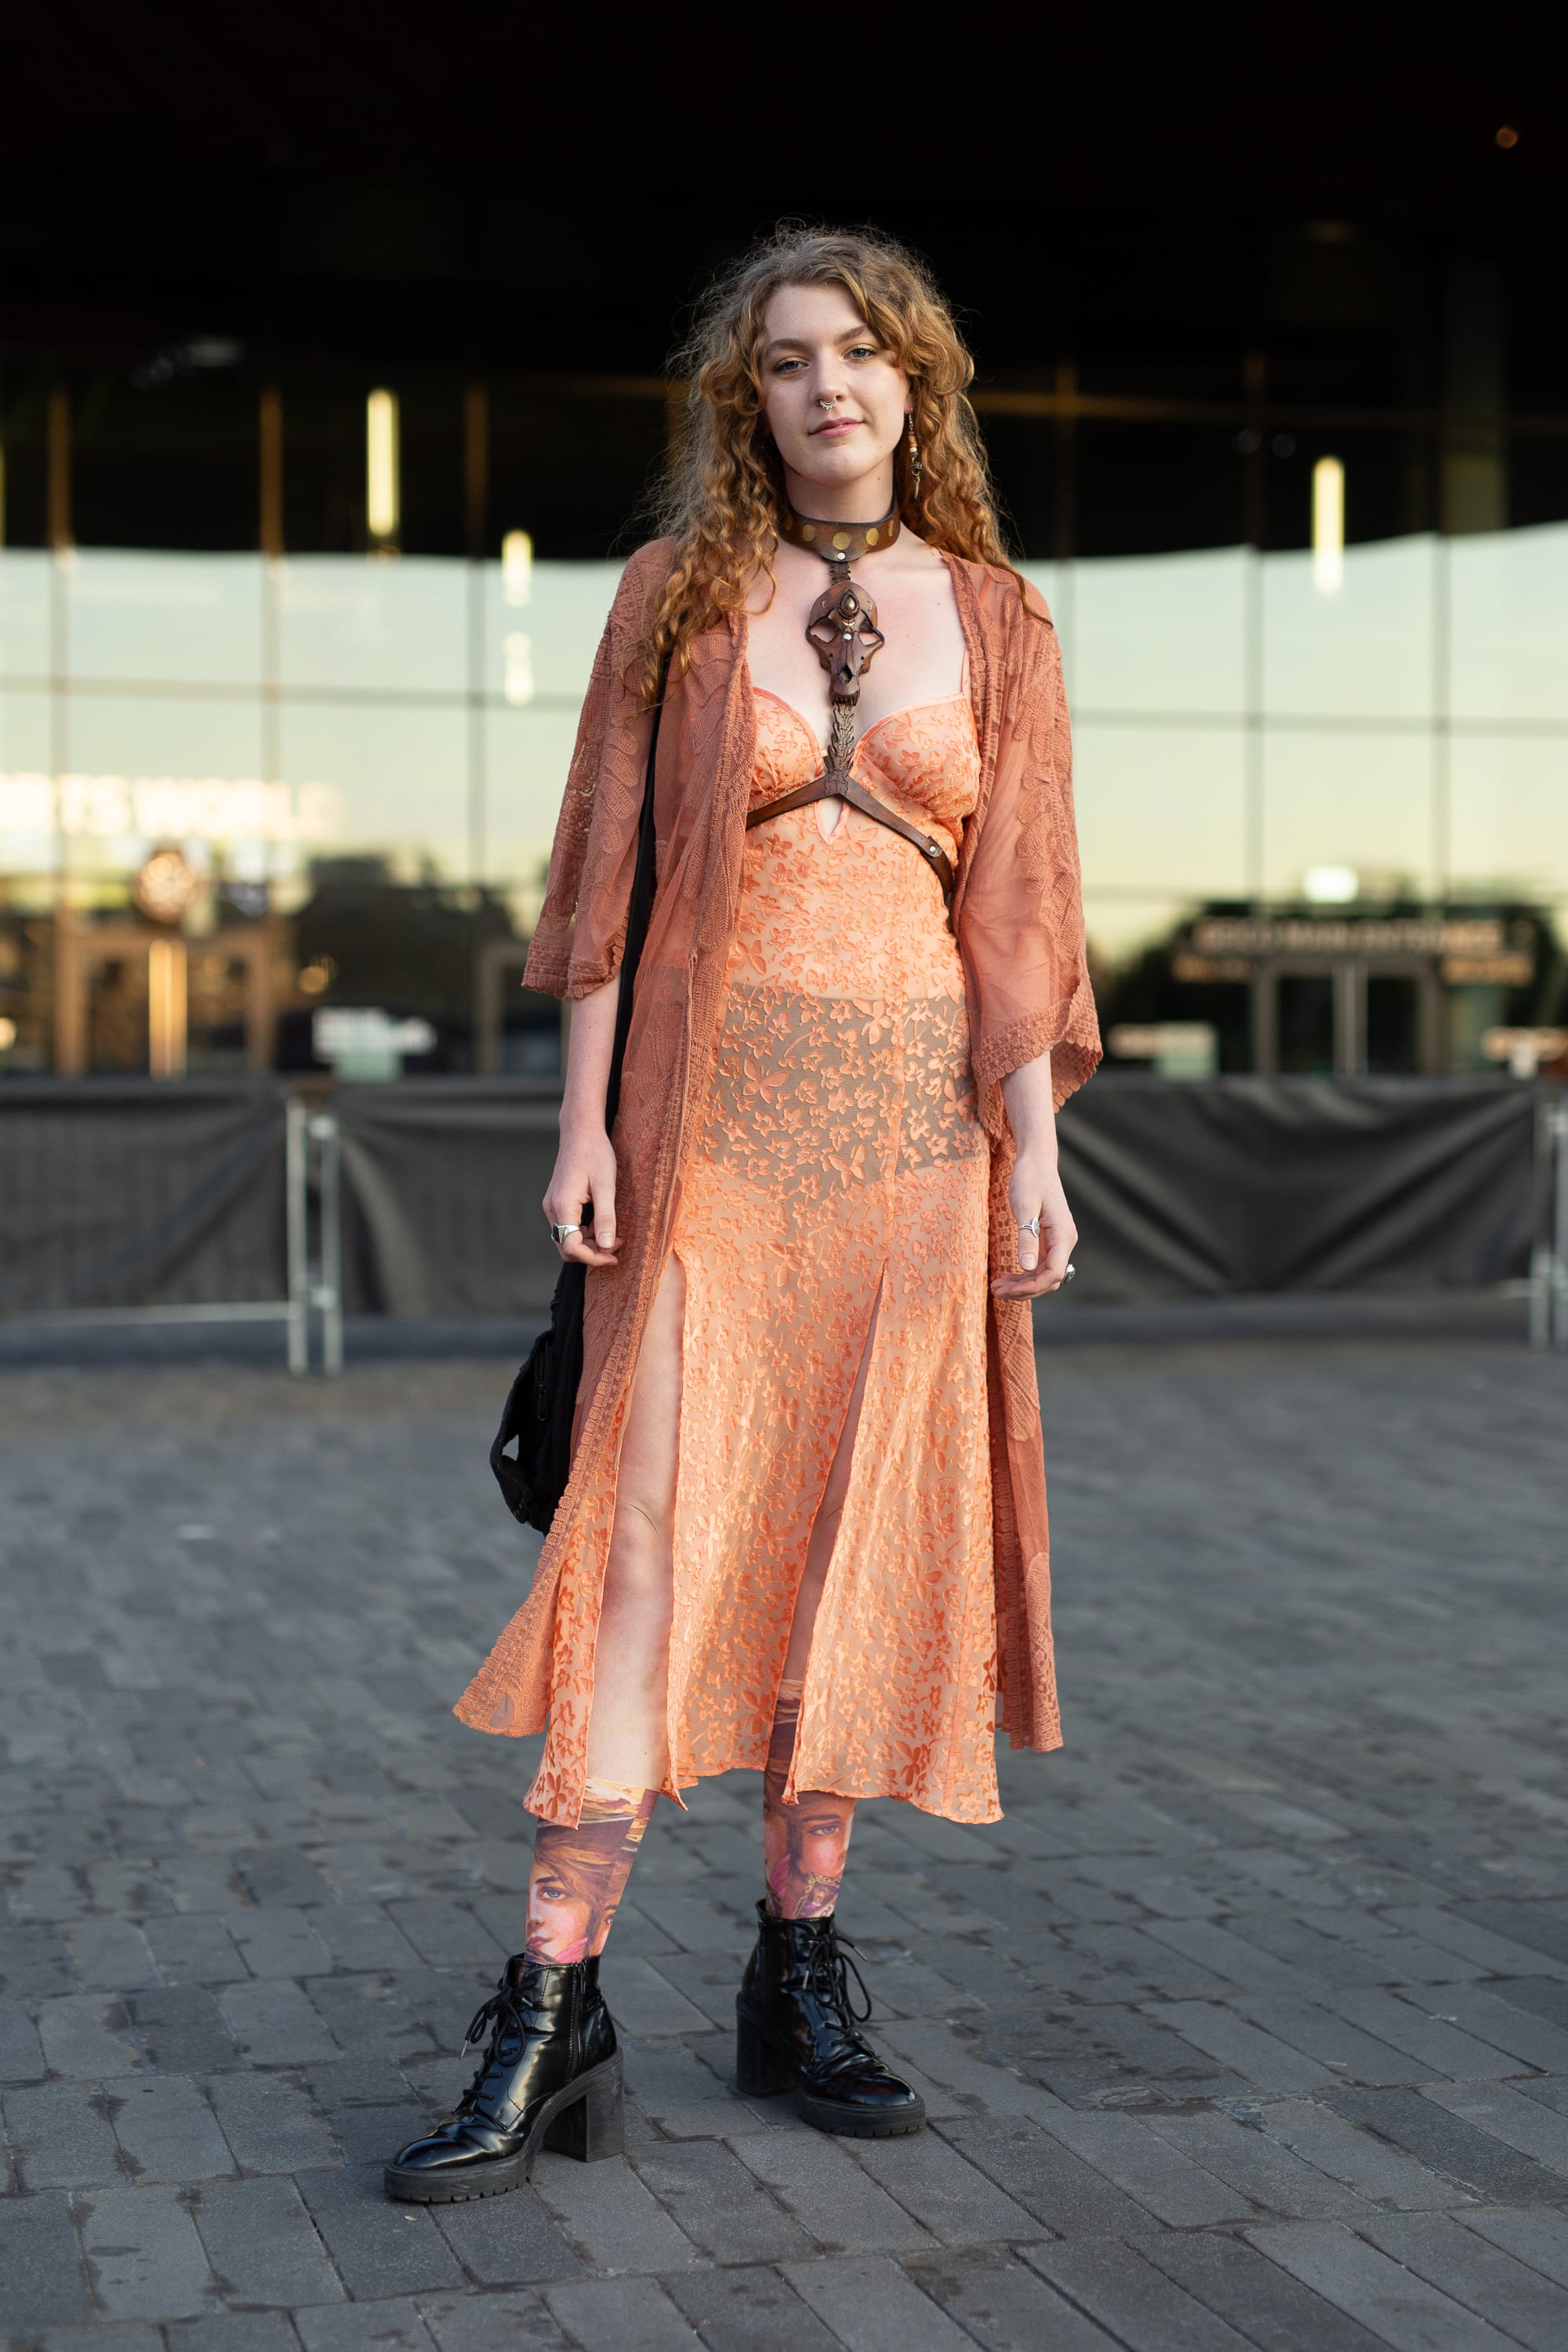 Styling an orange sheer dress with black underwear., This Is by Far the  Riskiest Outfit We've Seen at Fashion Week